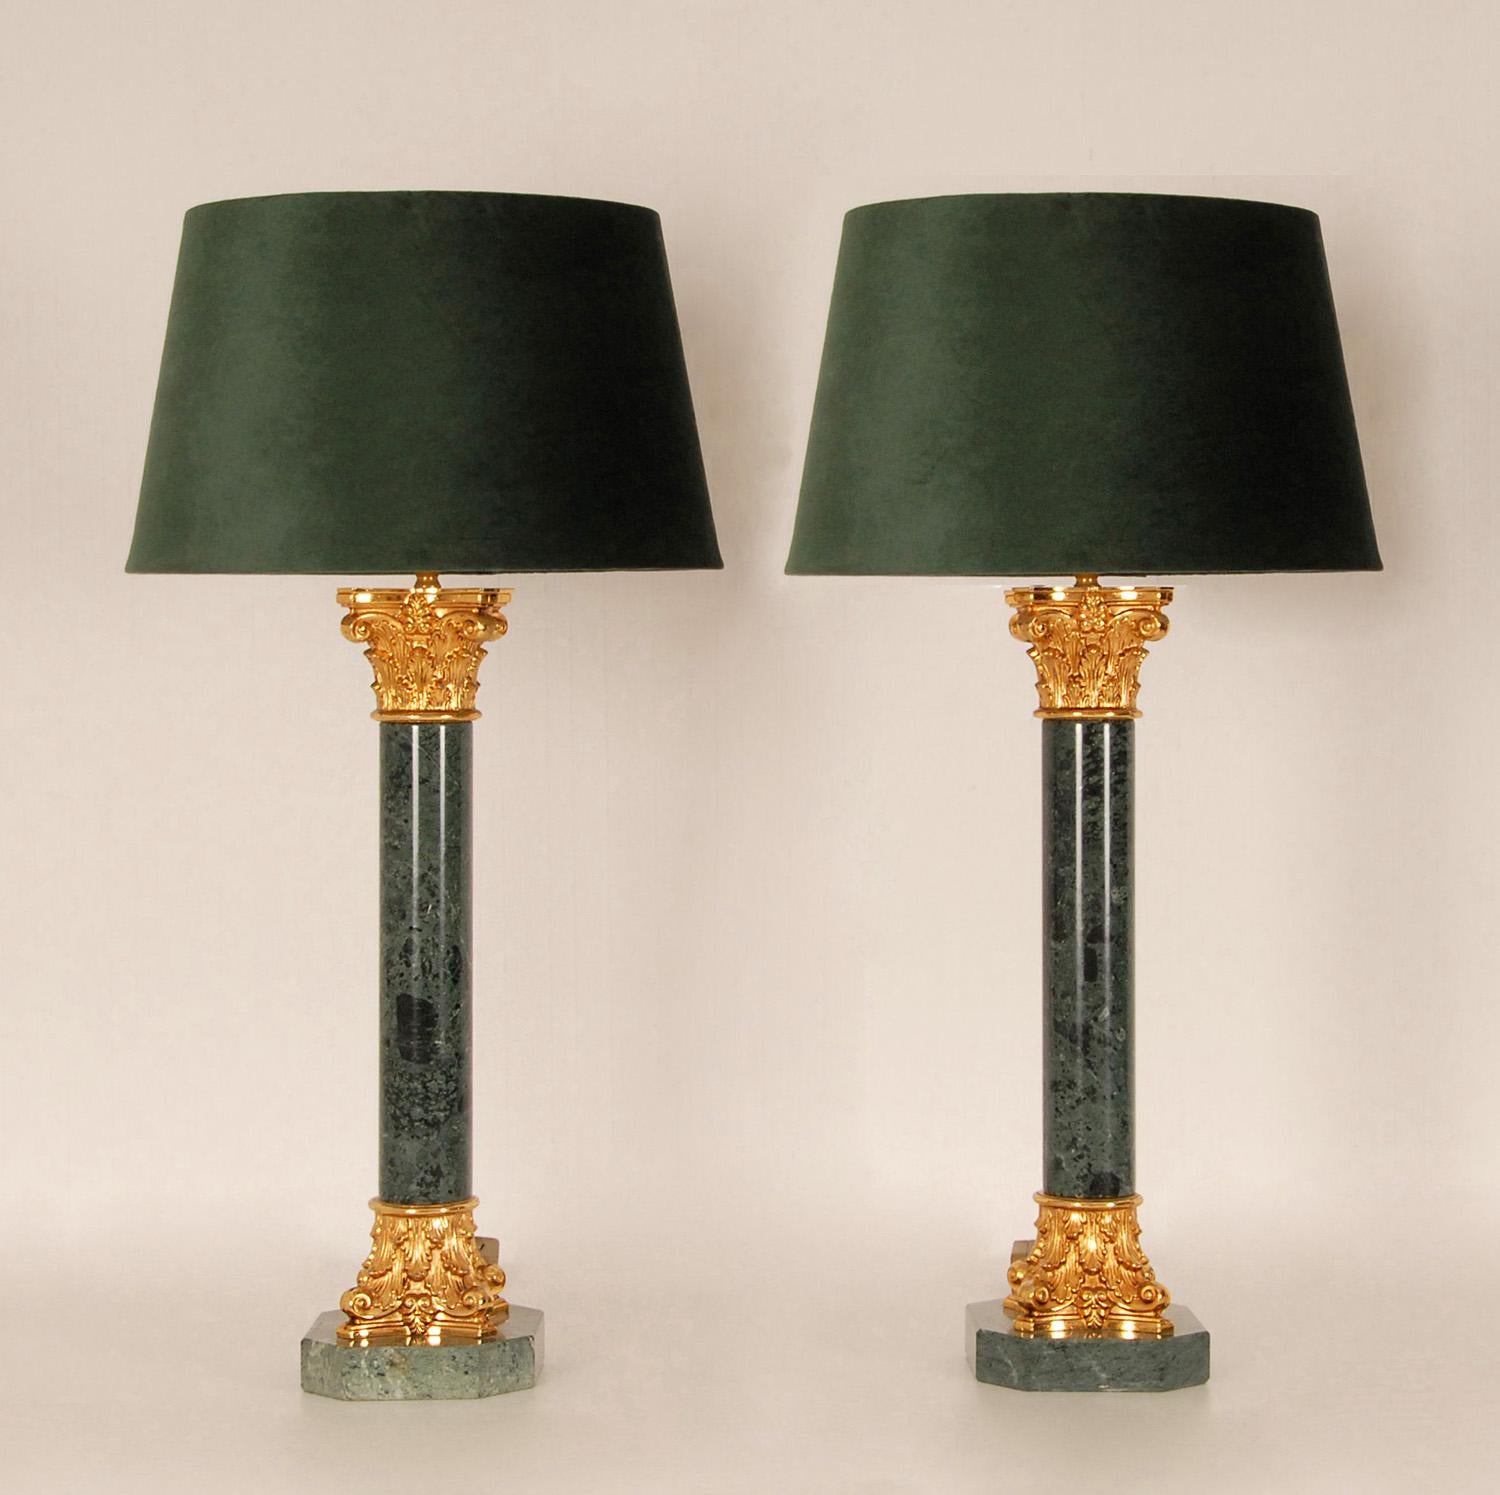 Vintage High end Italian green marble and gold gilded bronze corinthian column table lamps
Style: Napoleonic, Empire, Regency, Neoclassical, Antique, Vintage, classic table lamps
Design: In the manner of E.F. Caldwell, Chapman, Maison Charles,